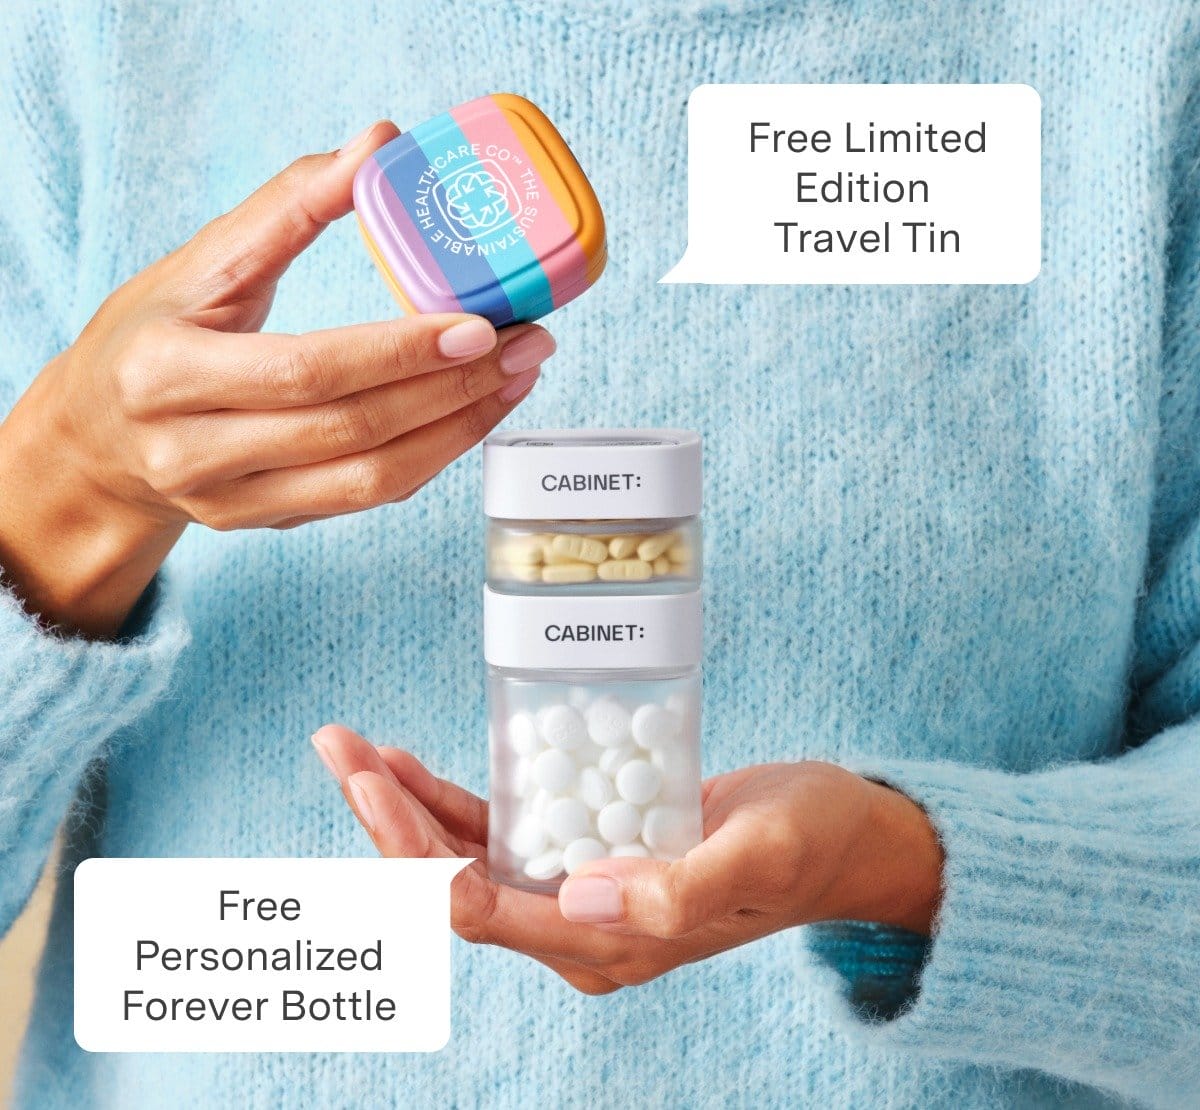 Free Travel Tin with Prescriptions - Free Limited Edition Travel Tin - Free Personalized Forever Bottle